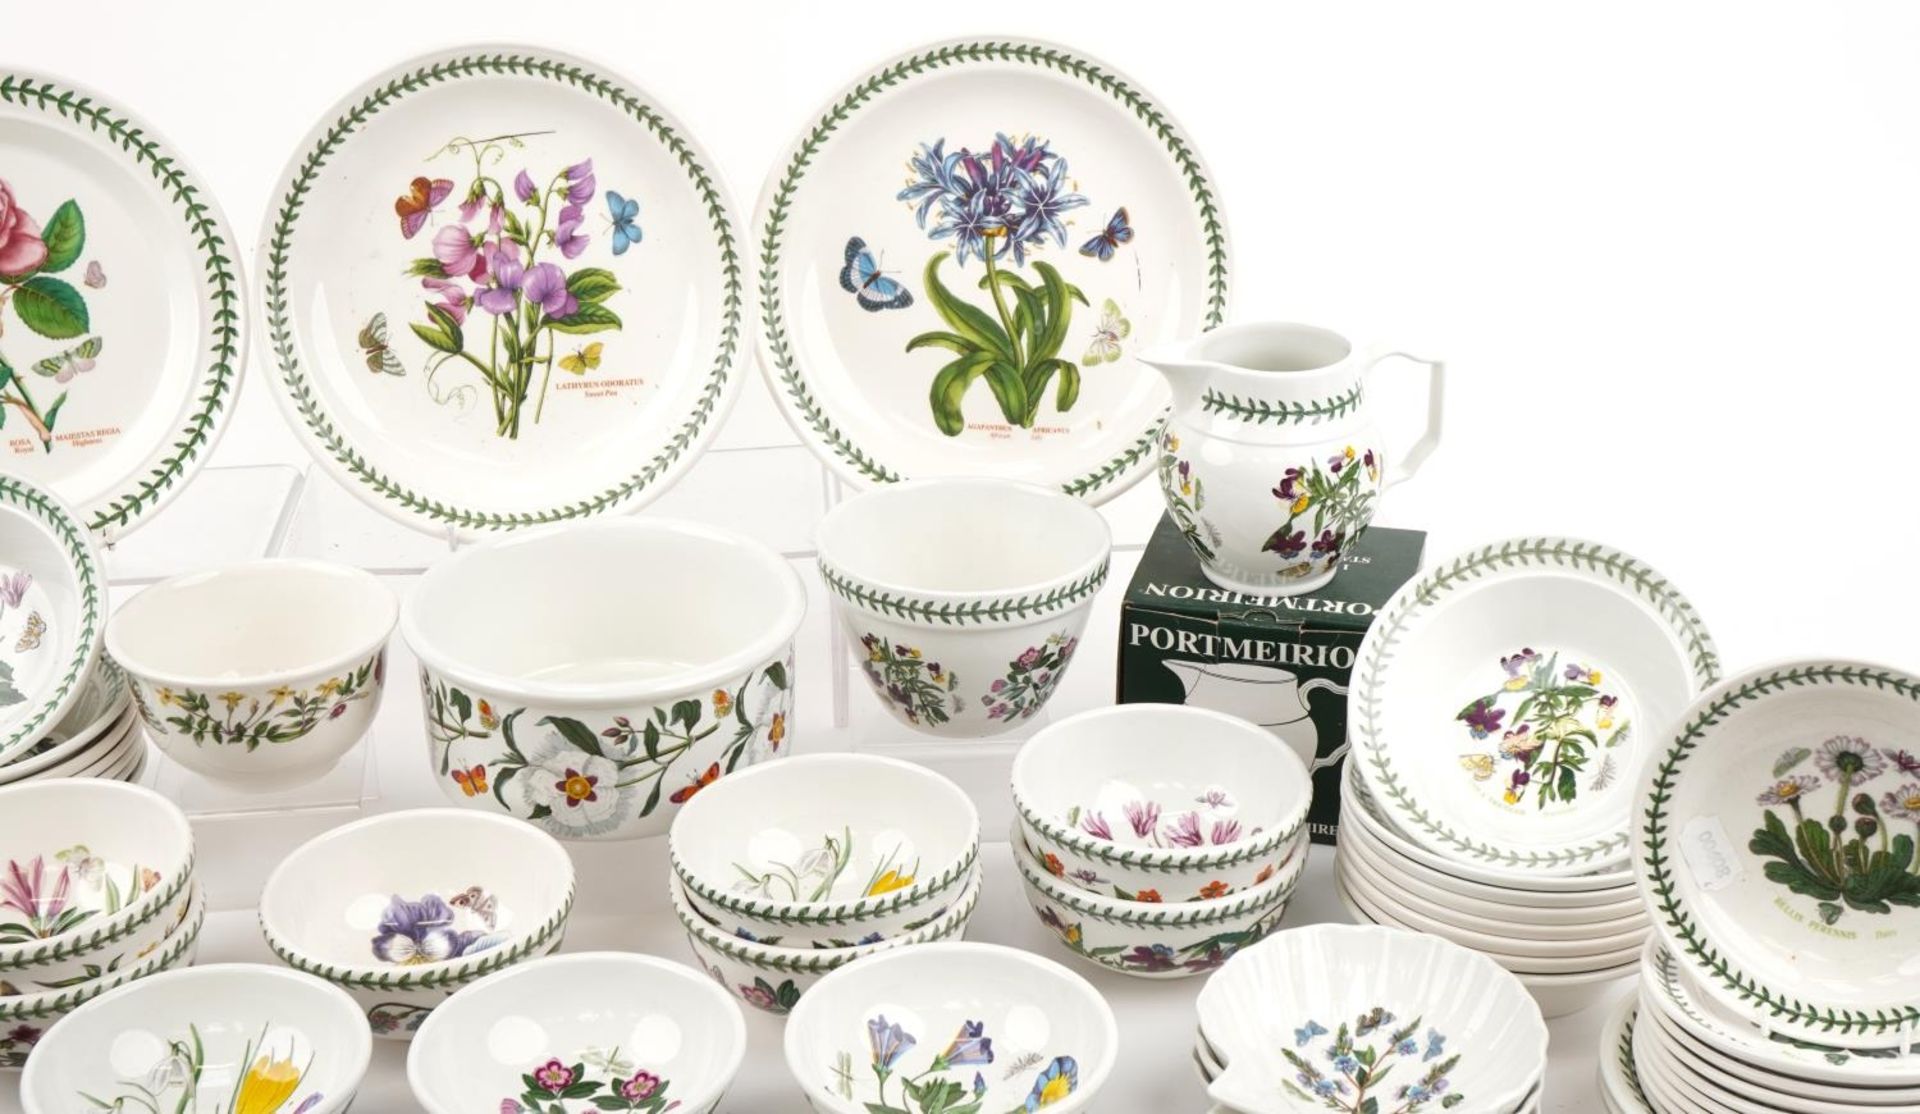 Large collection of Portmeirion Botanic Garden plates, bowls and dishes, the largest 27cm in - Image 5 of 14